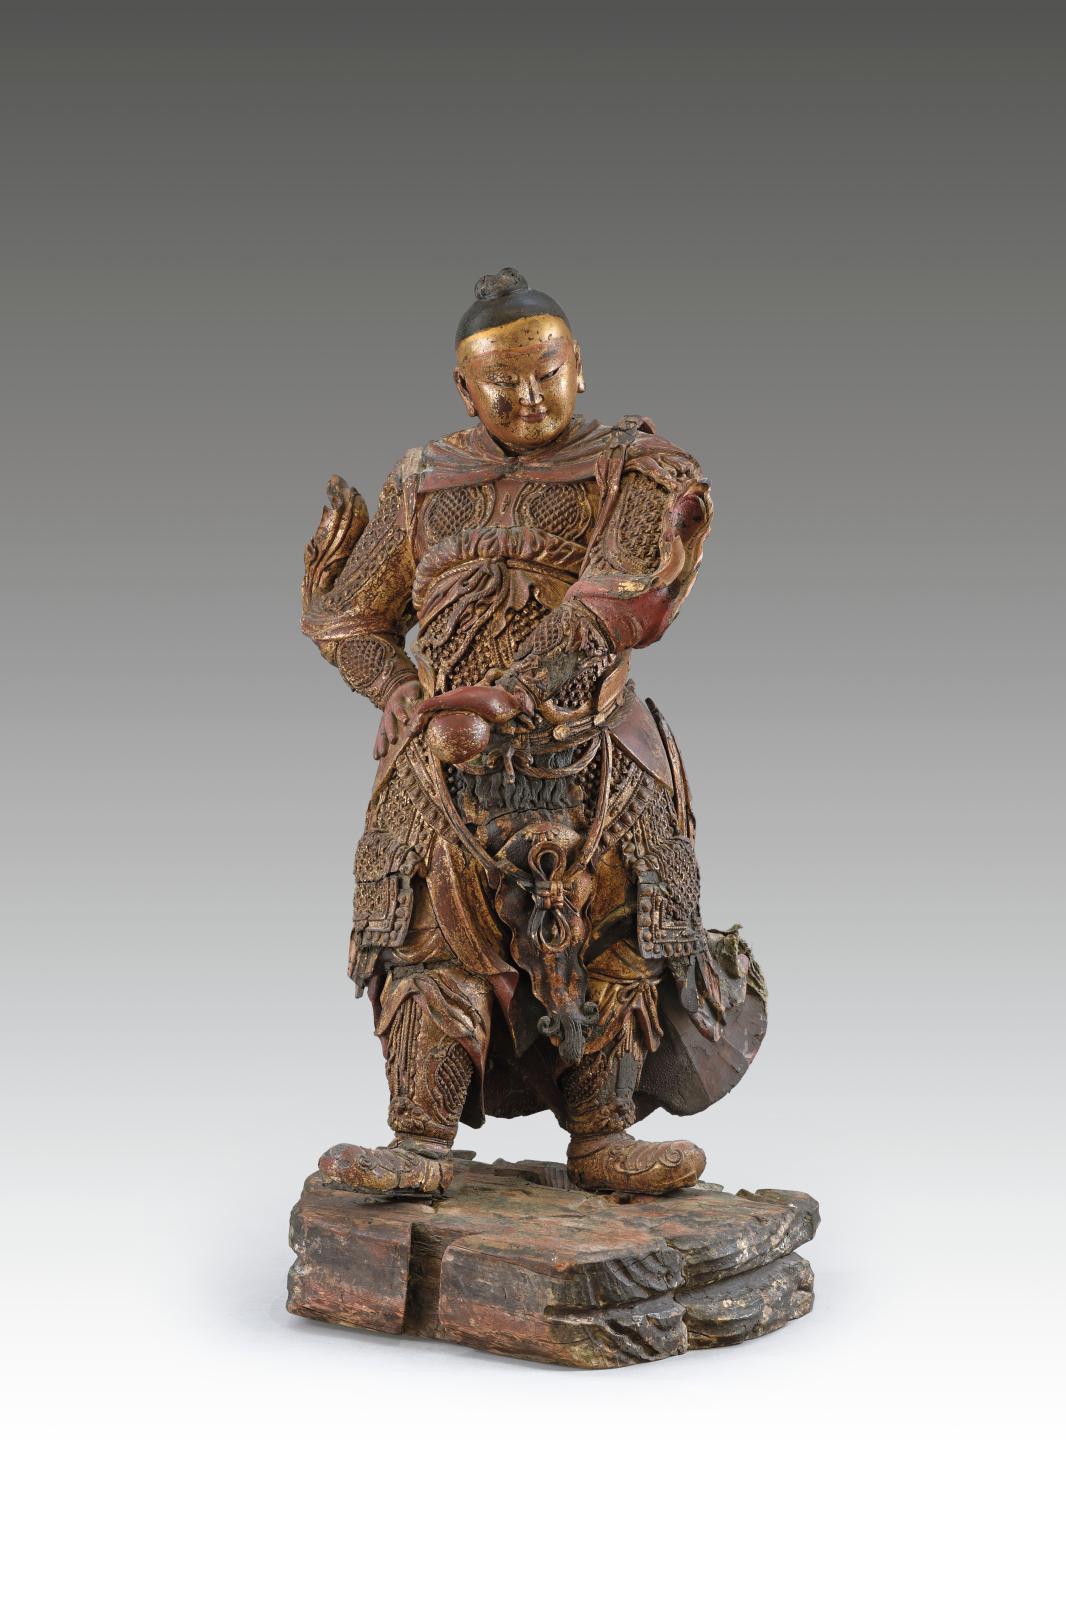 Arts of China and Japan: The Sacred and the Intimate 